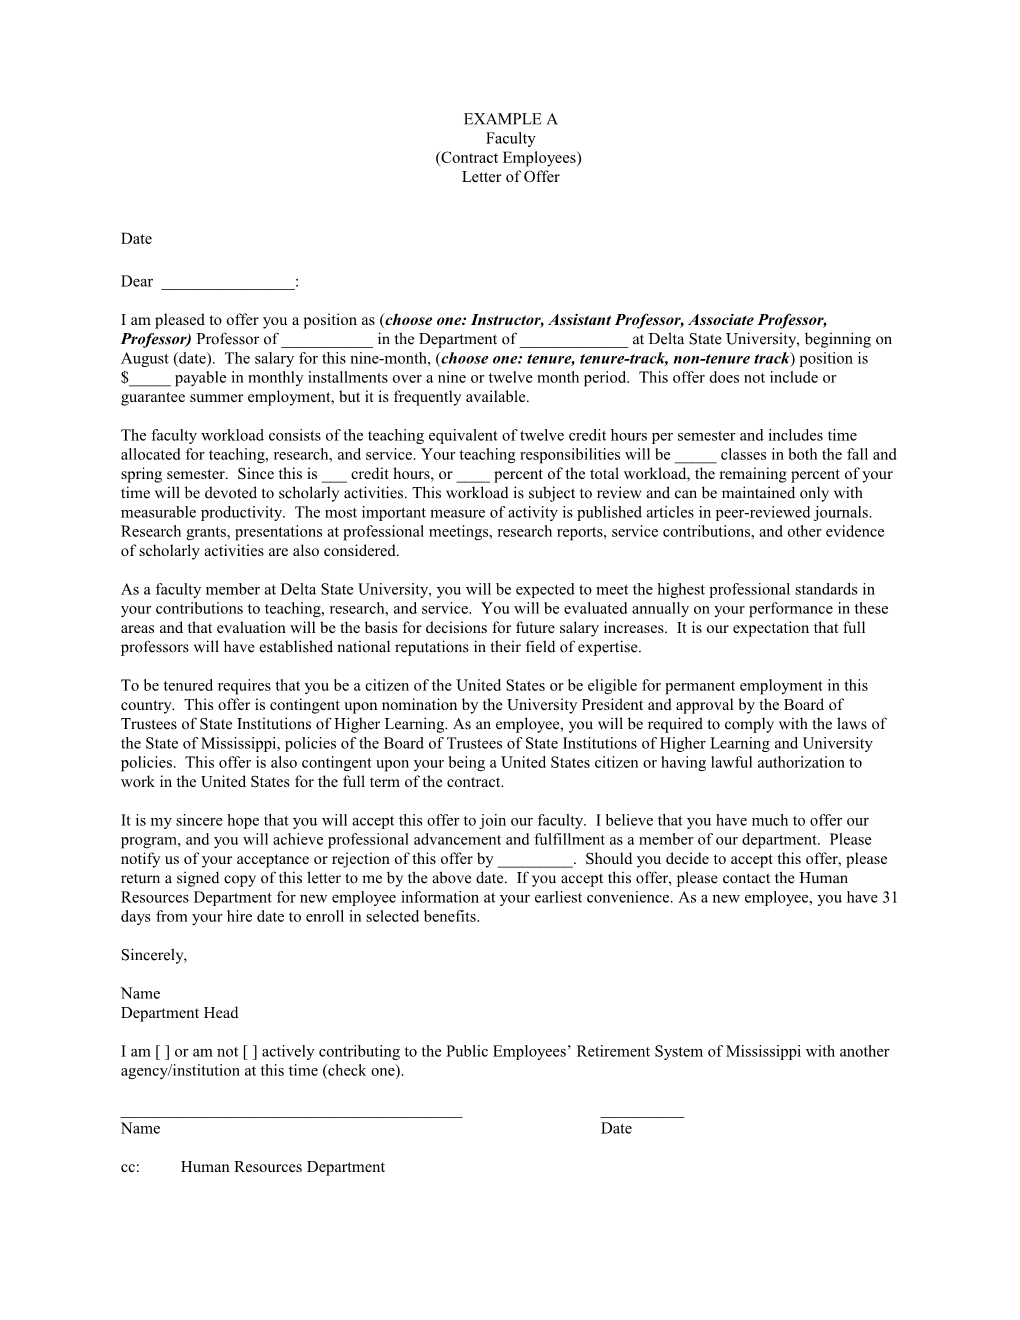 EXAMPLE a Faculty (Contract Employees) Letter of Offer